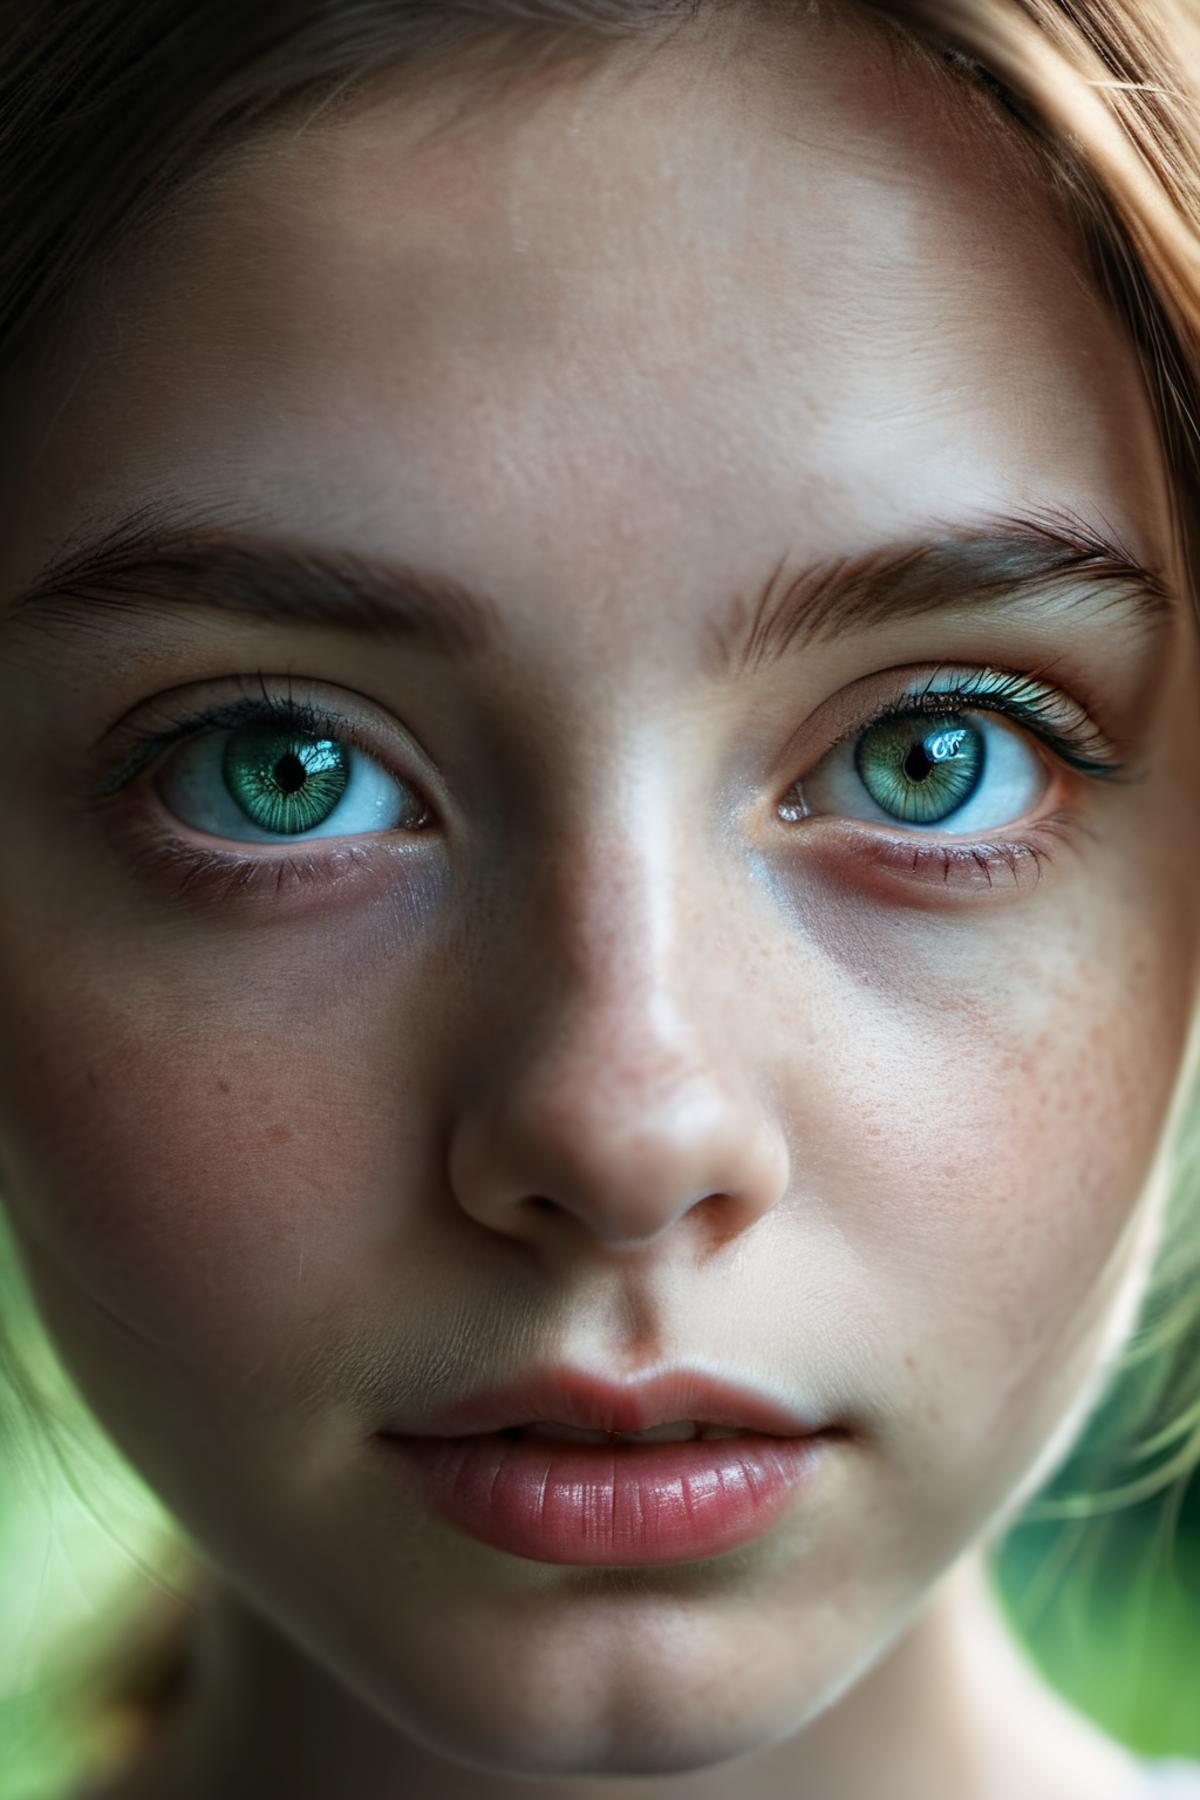 A close-up of a girl's face with green eyes and a nose.